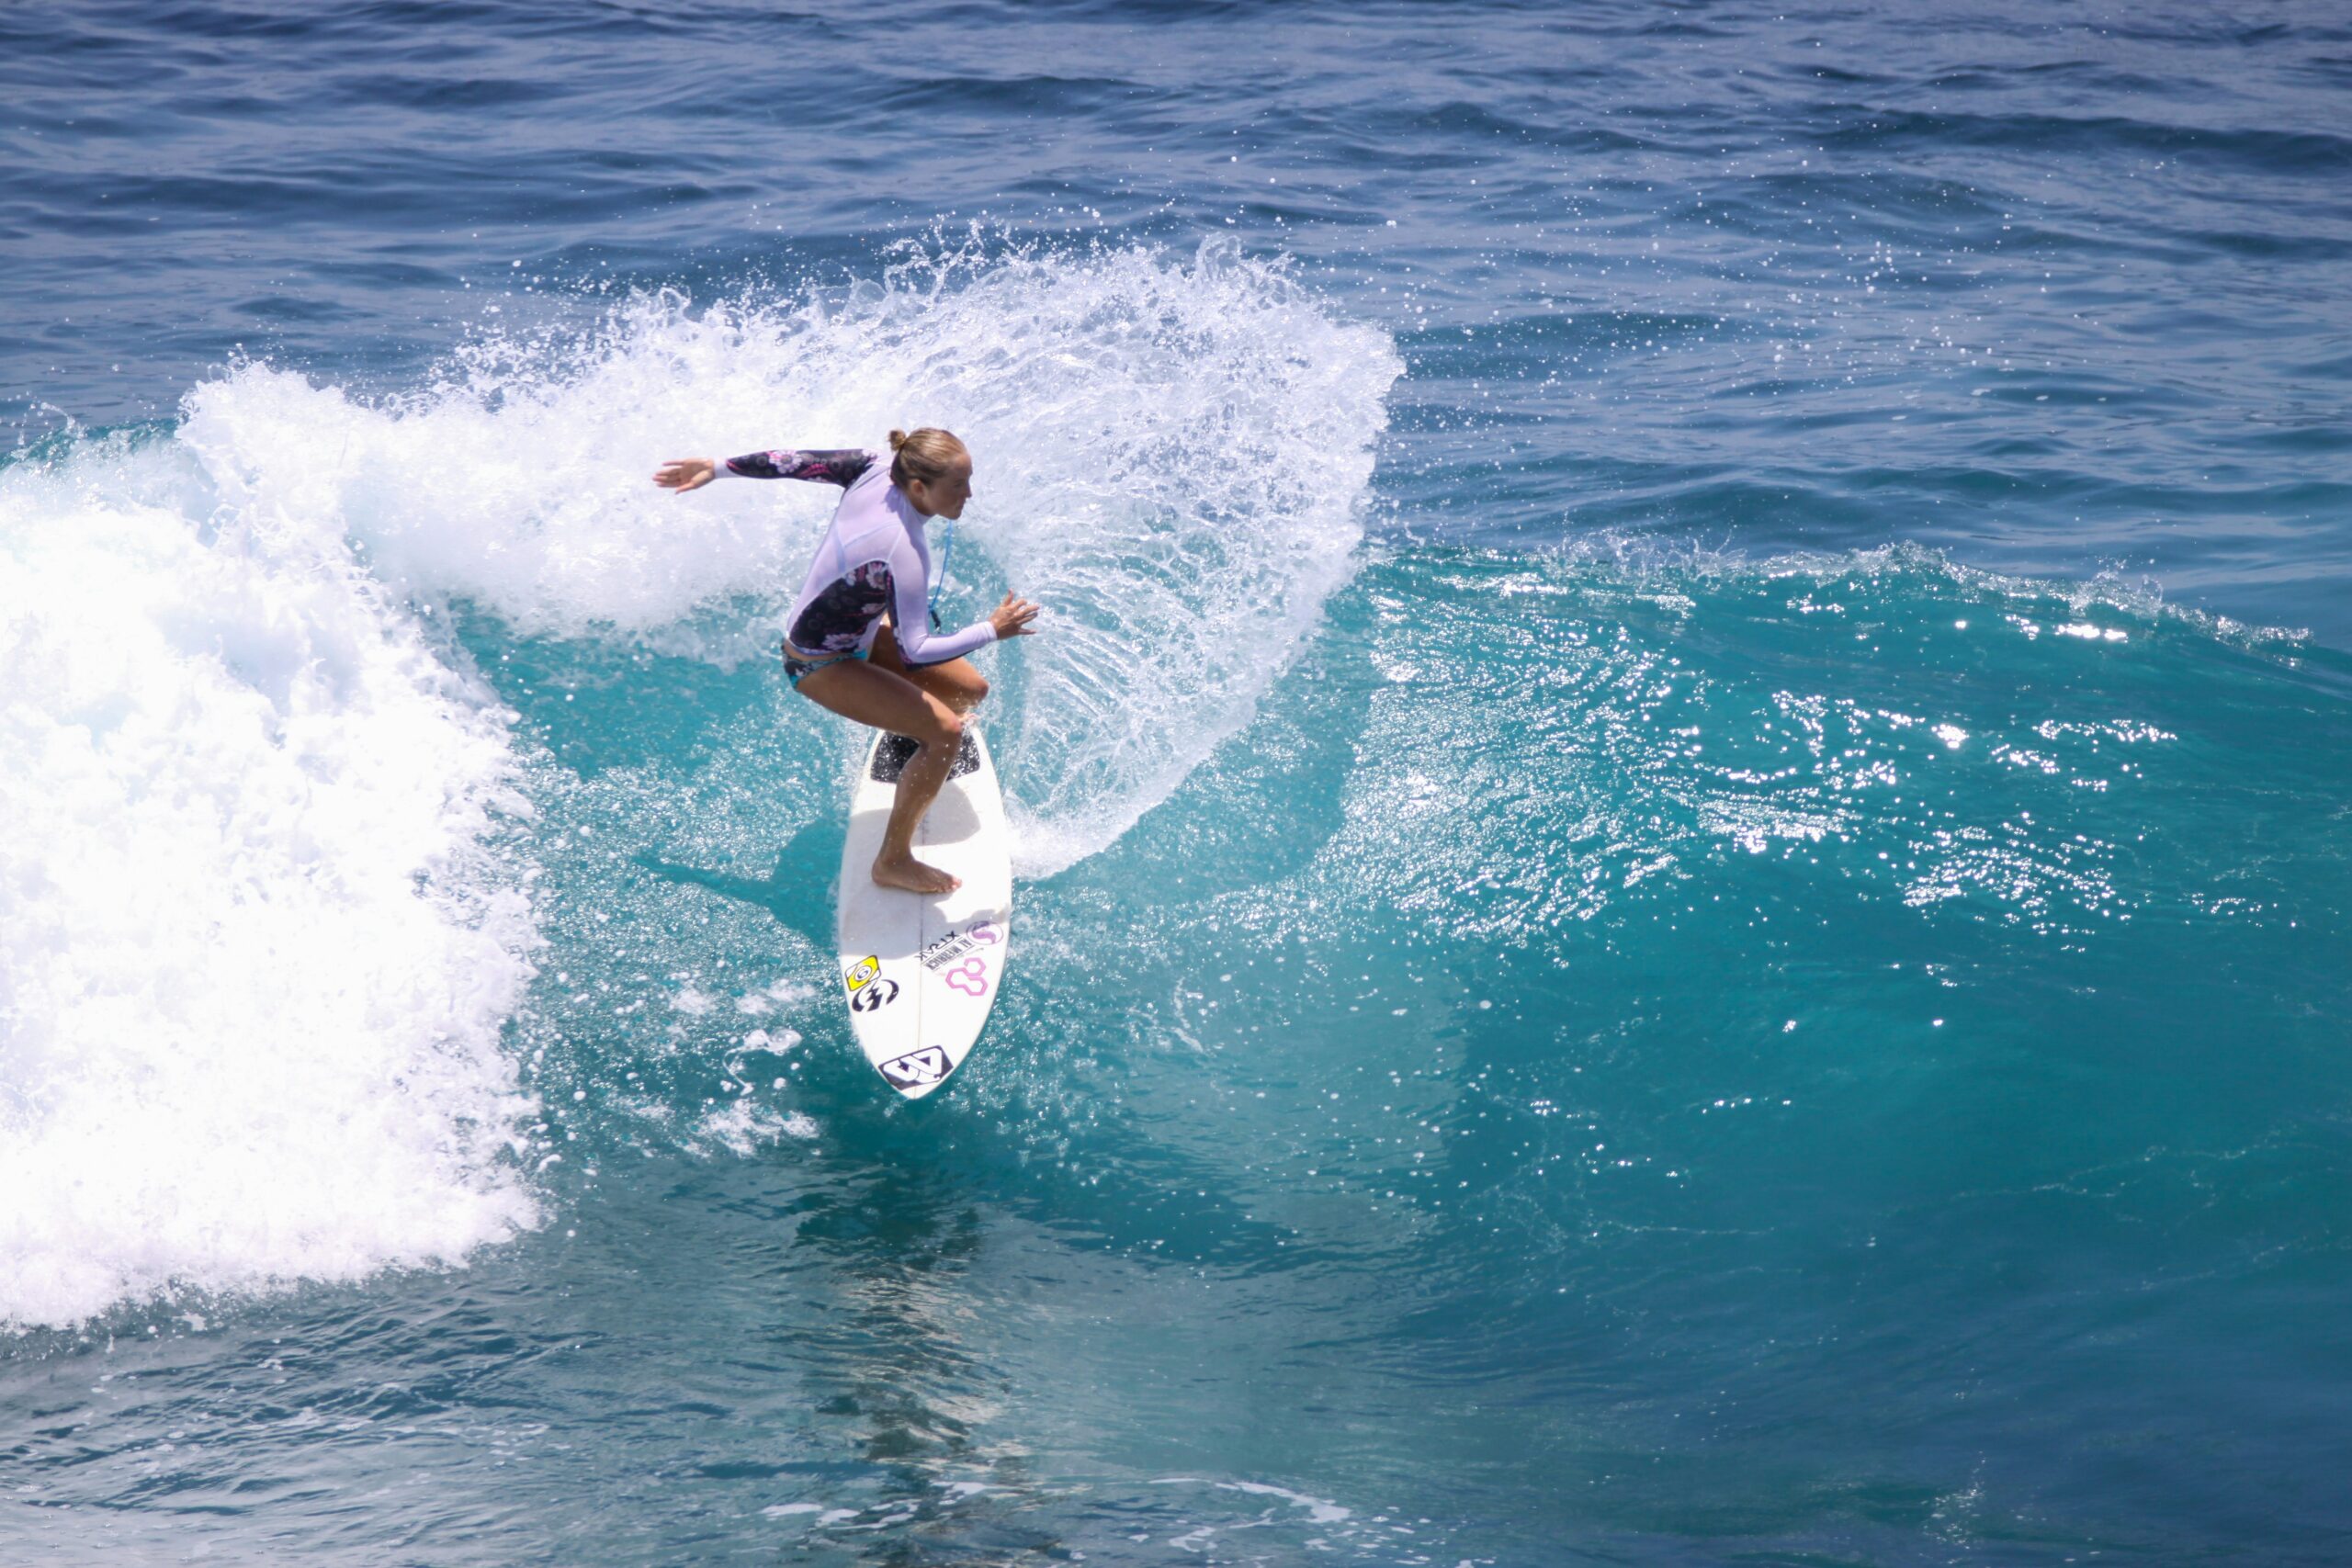 A Beginner's Guide to Surfing